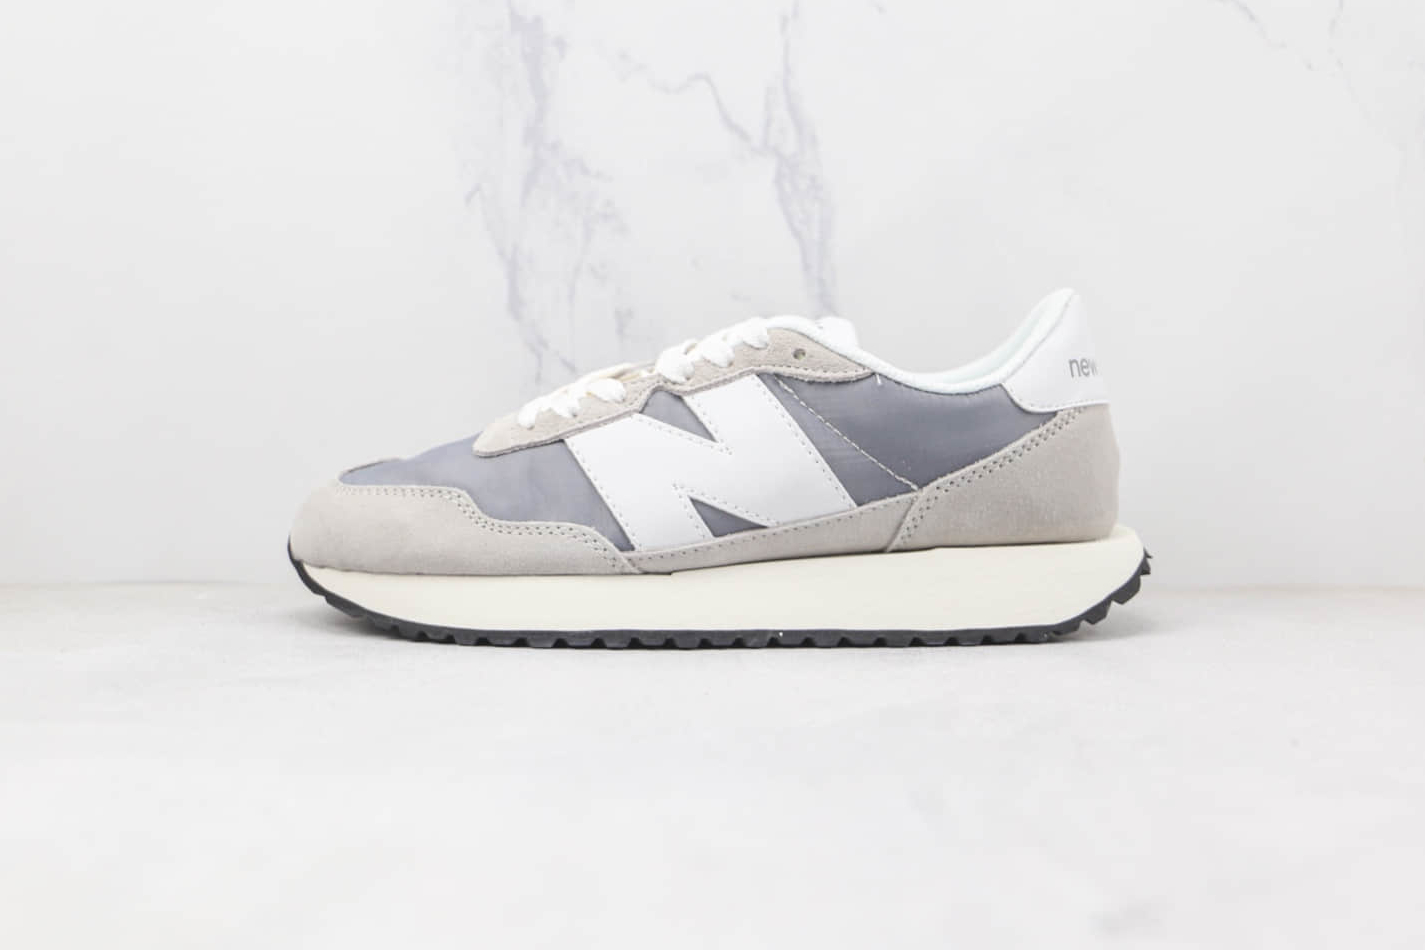 New Balance 237 'Rain Cloud Steel' MS237RCS - Shop Now for the Latest Fashionable Sneakers